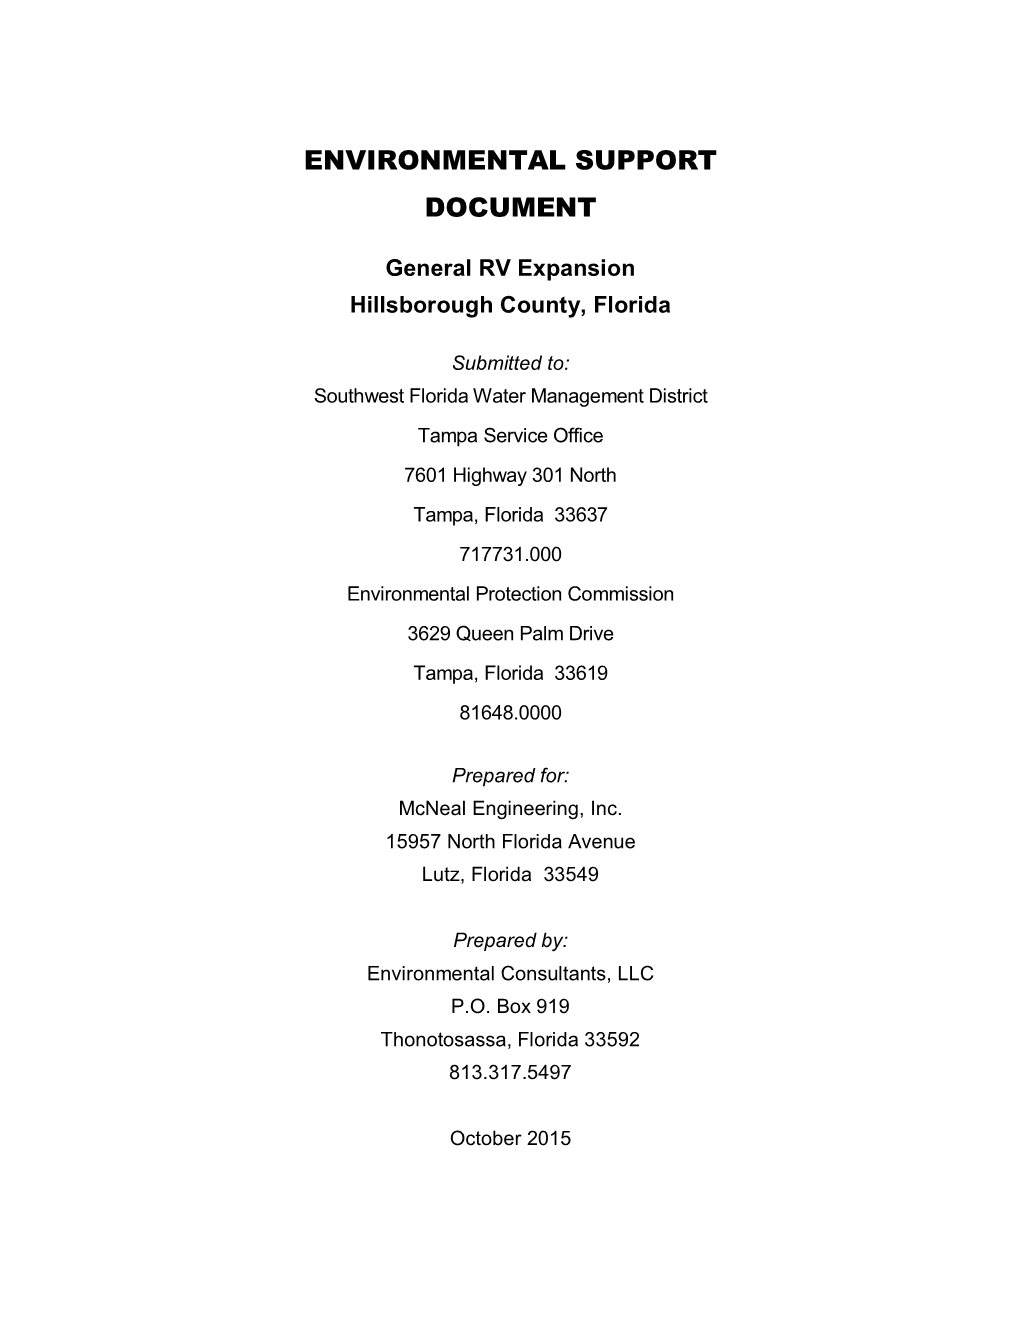 Environmental Support Document